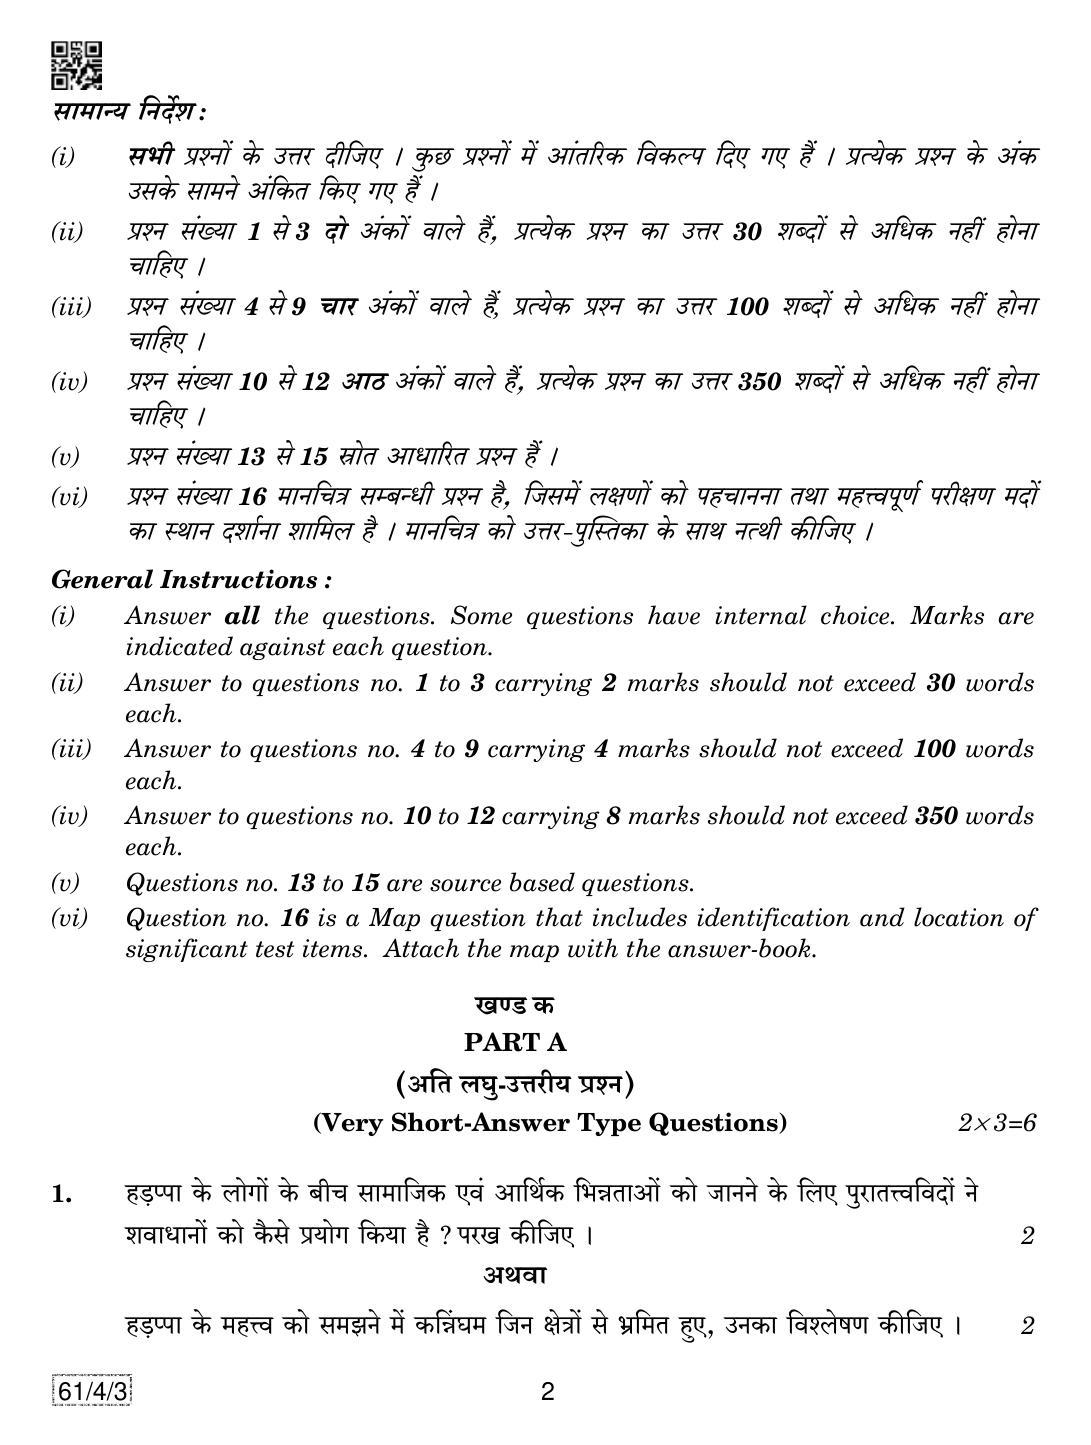 CBSE Class 12 61-4-3 History 2019 Question Paper - Page 2